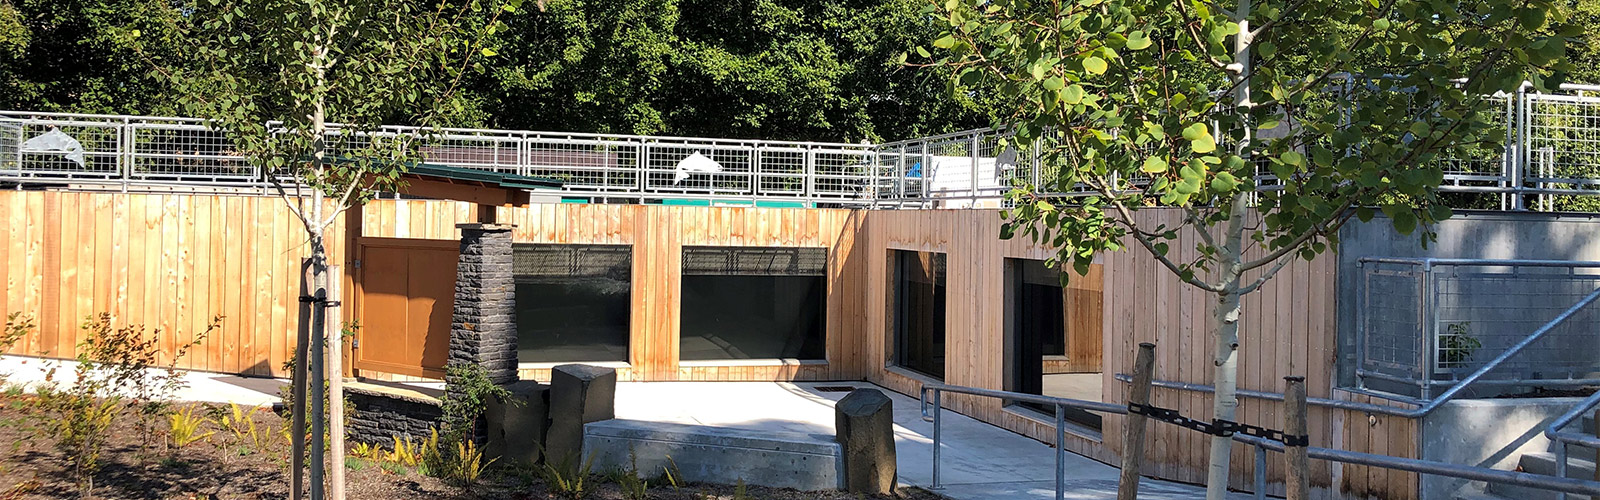 New fish hatchery viewing area at Brewery Park at Tumwater Falls